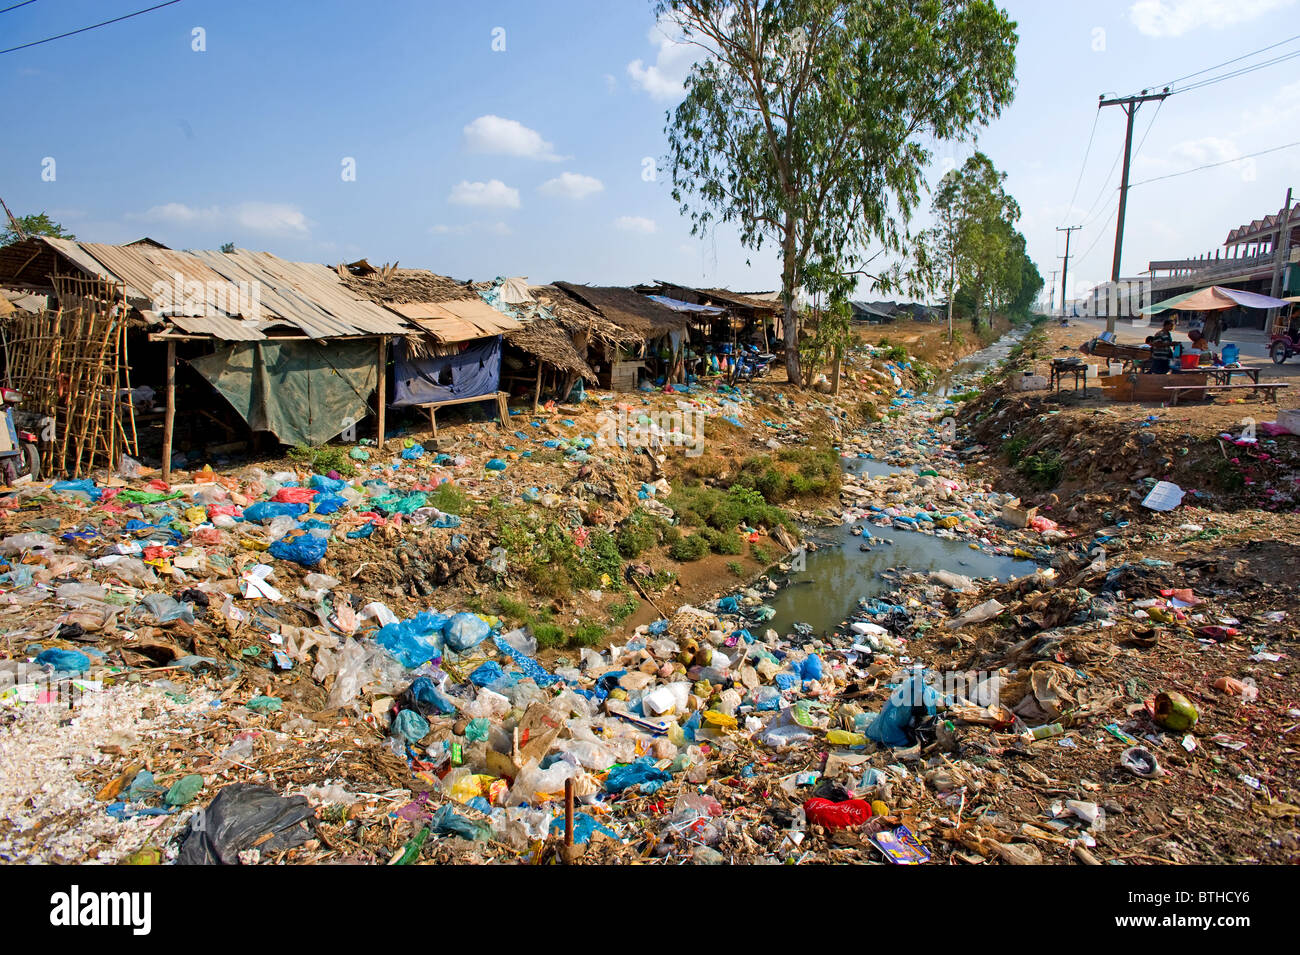 Polluted water by a marketplace, Phnom Penh, Cambodia Stock Photo